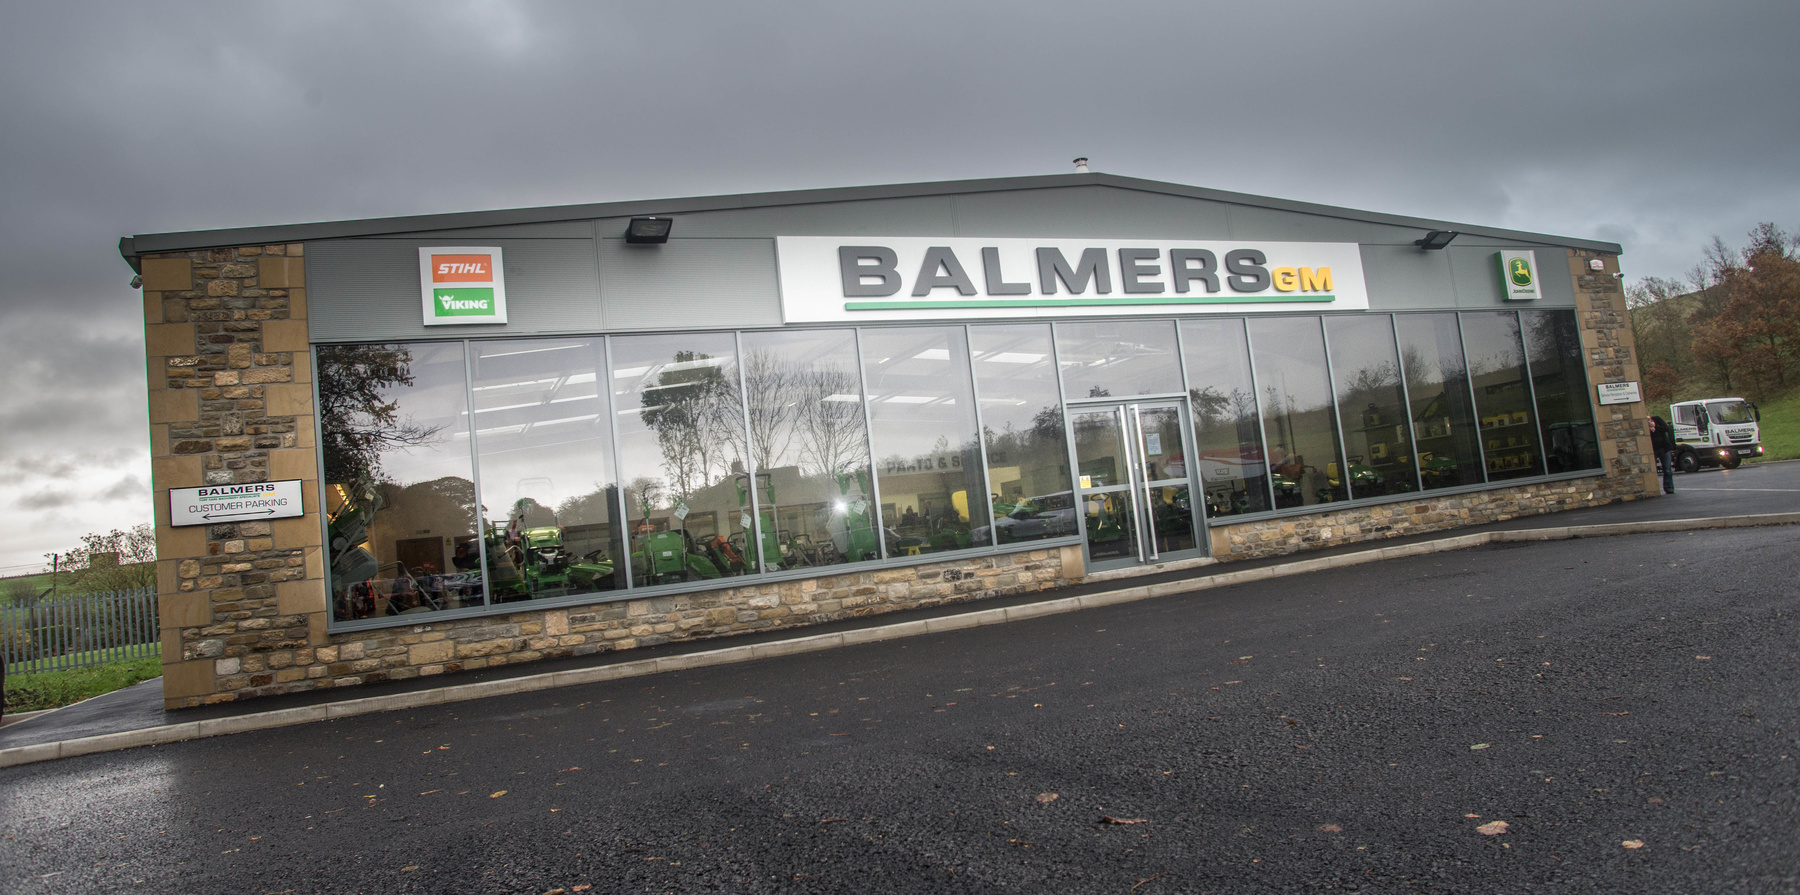 In Business_Balmers_23/10/14